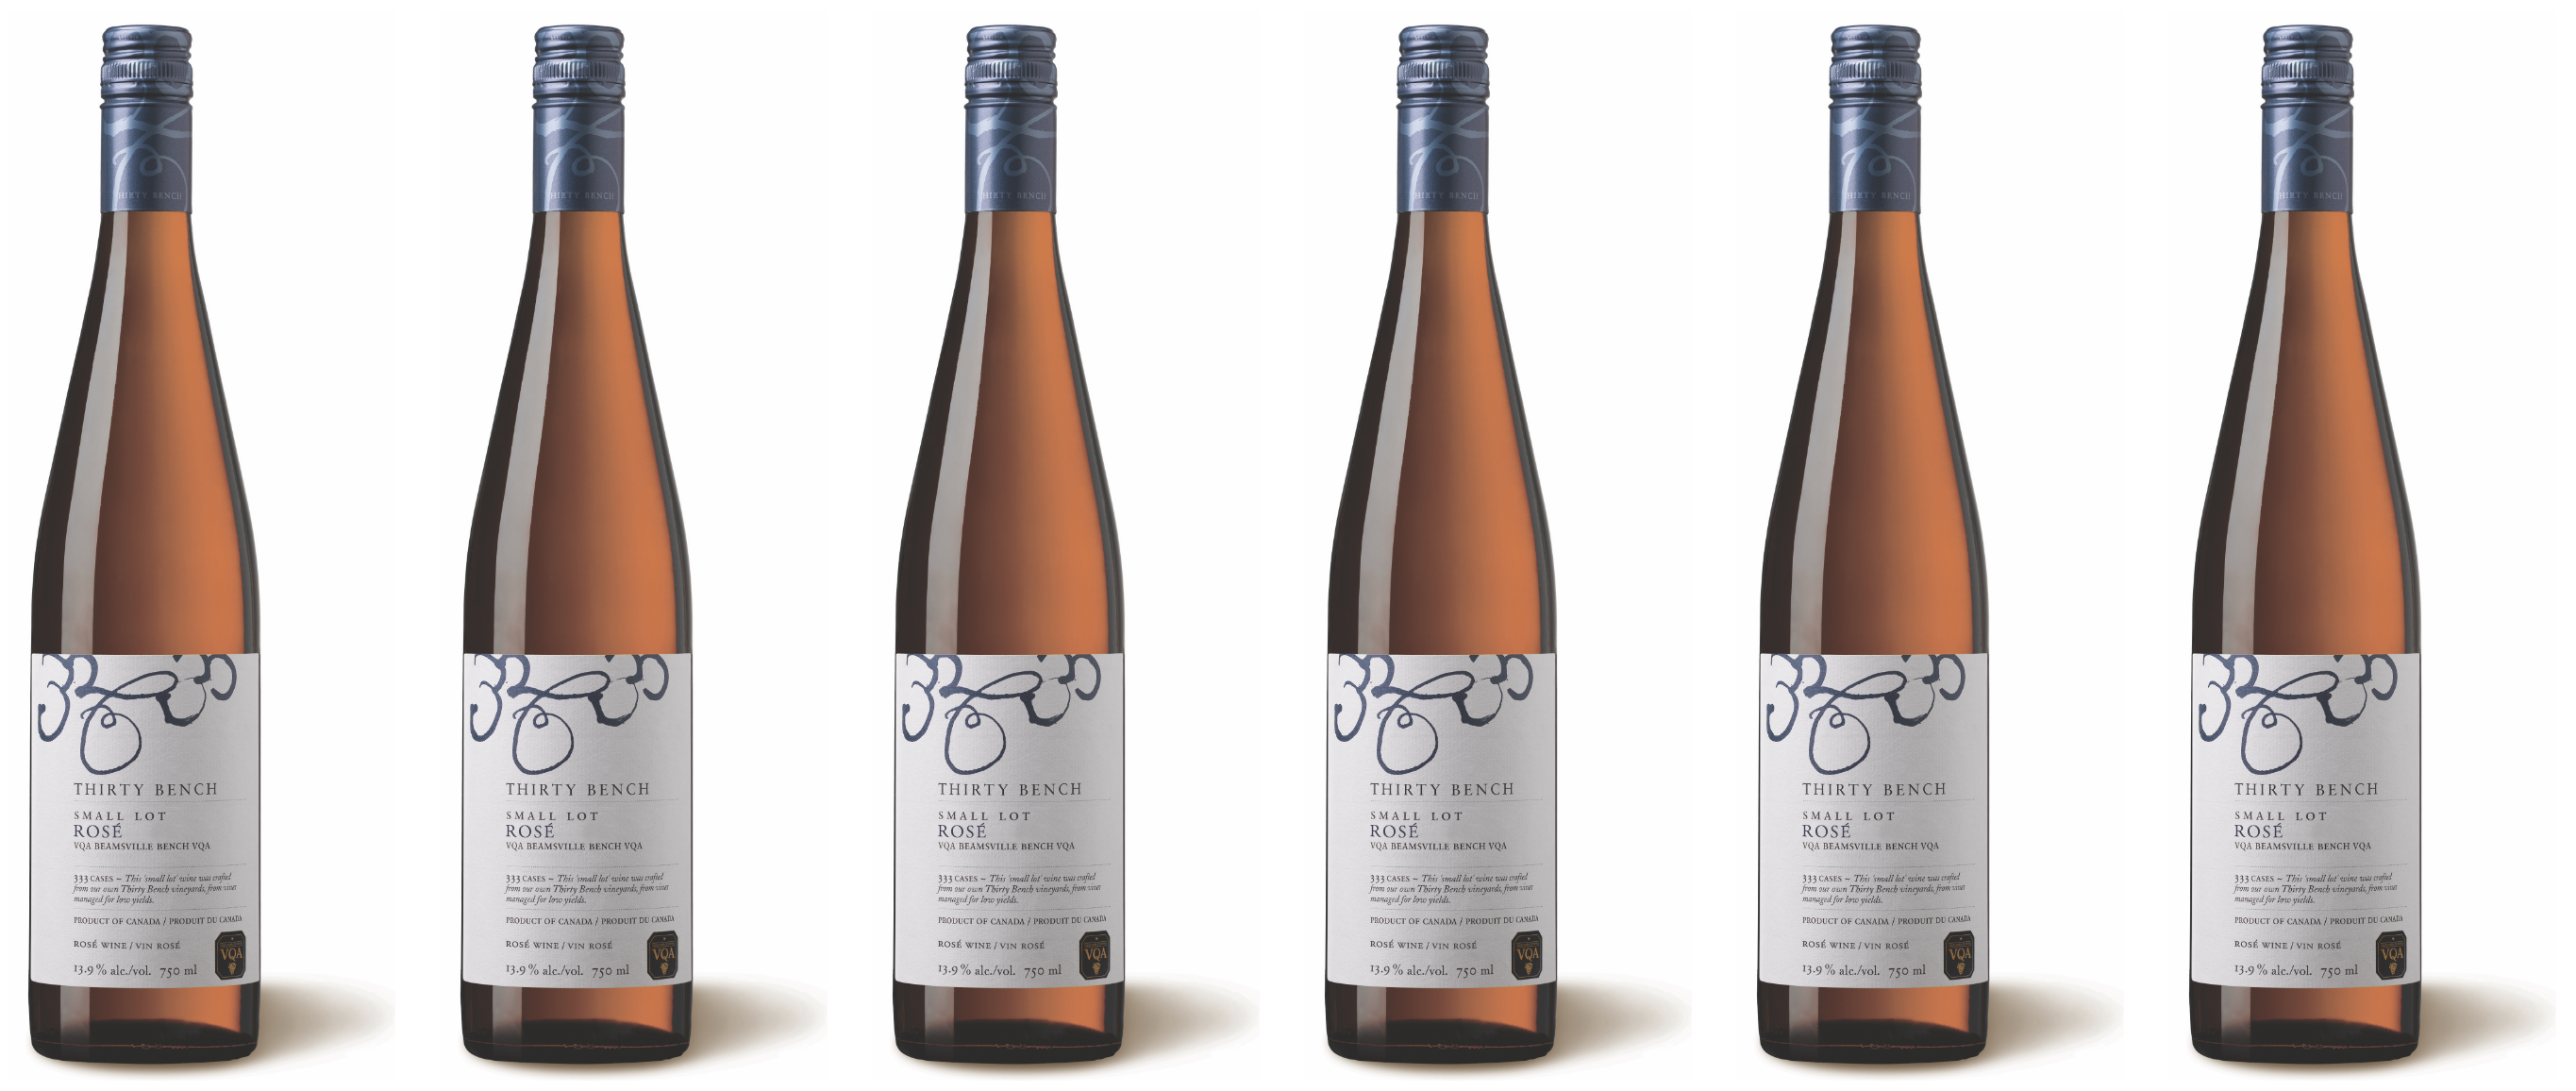 Try This : The Perfect Winter Rosé – Thirty Bench’s Small Lot